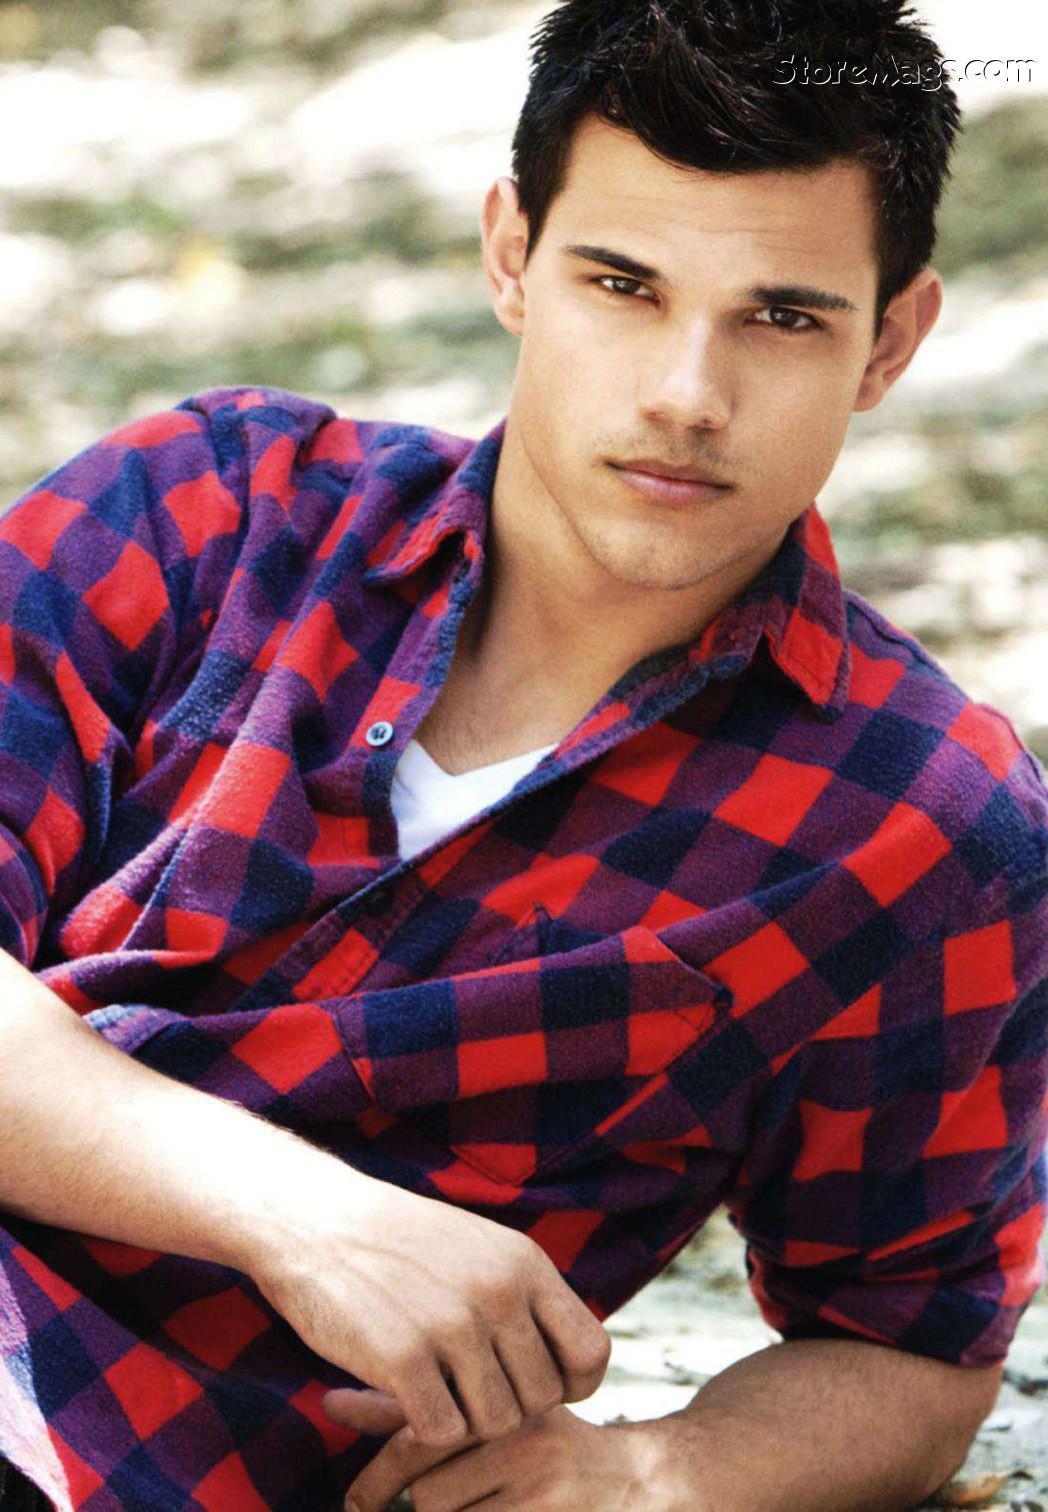 Taylor Lautner Shirt Off Photo Shared By Reece Fans Share